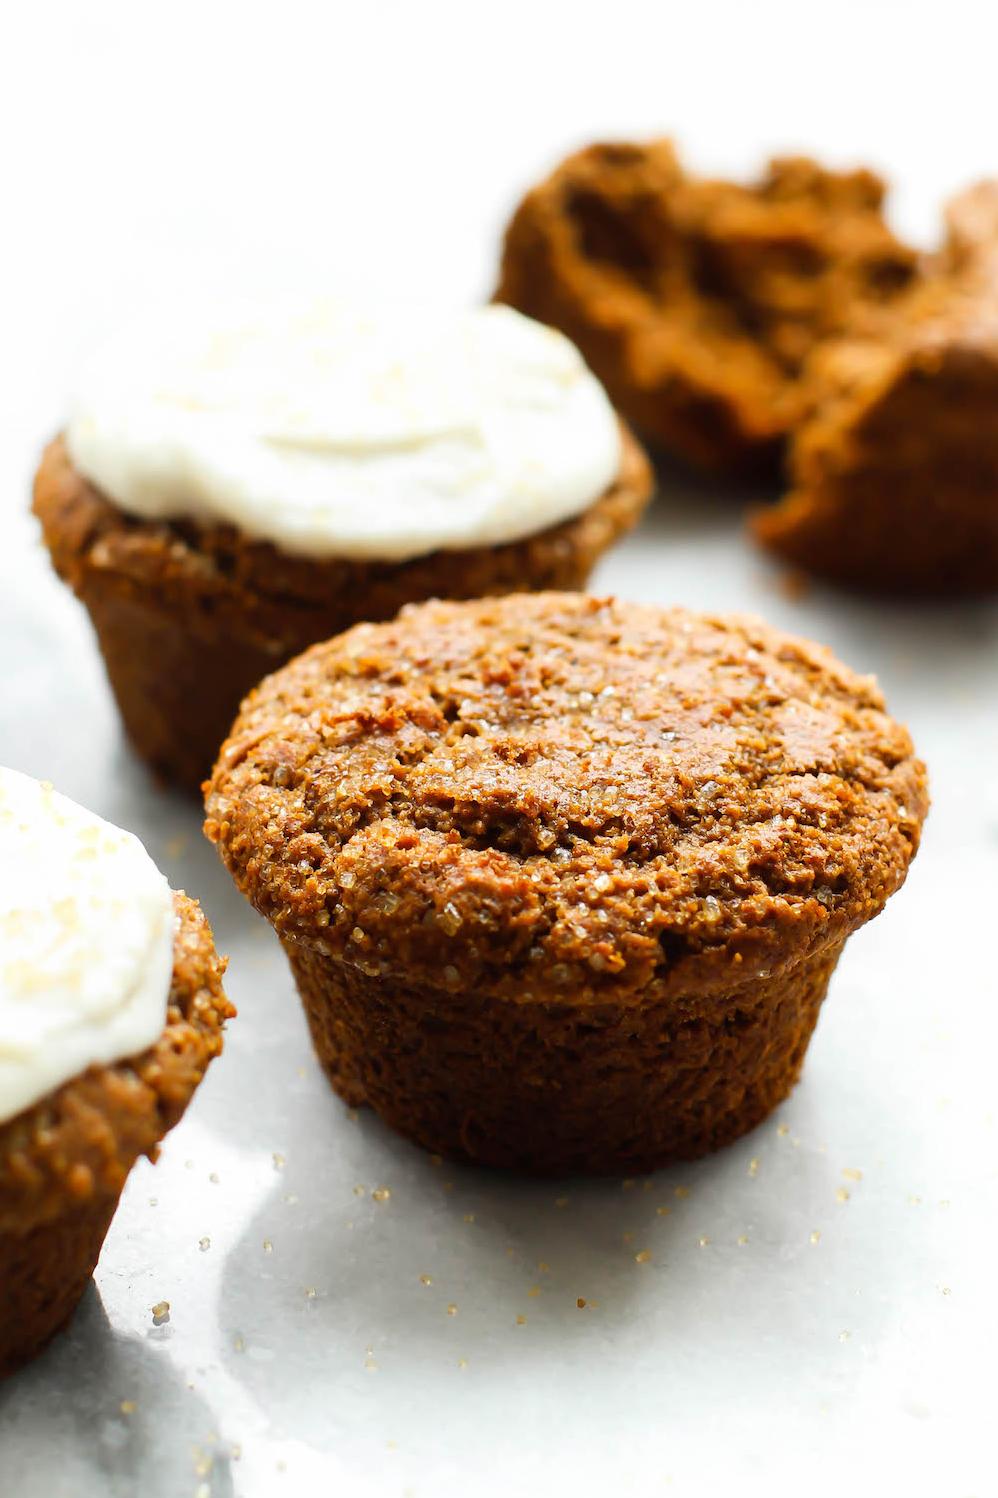  You won't even miss the gluten or dairy in these heavenly muffins